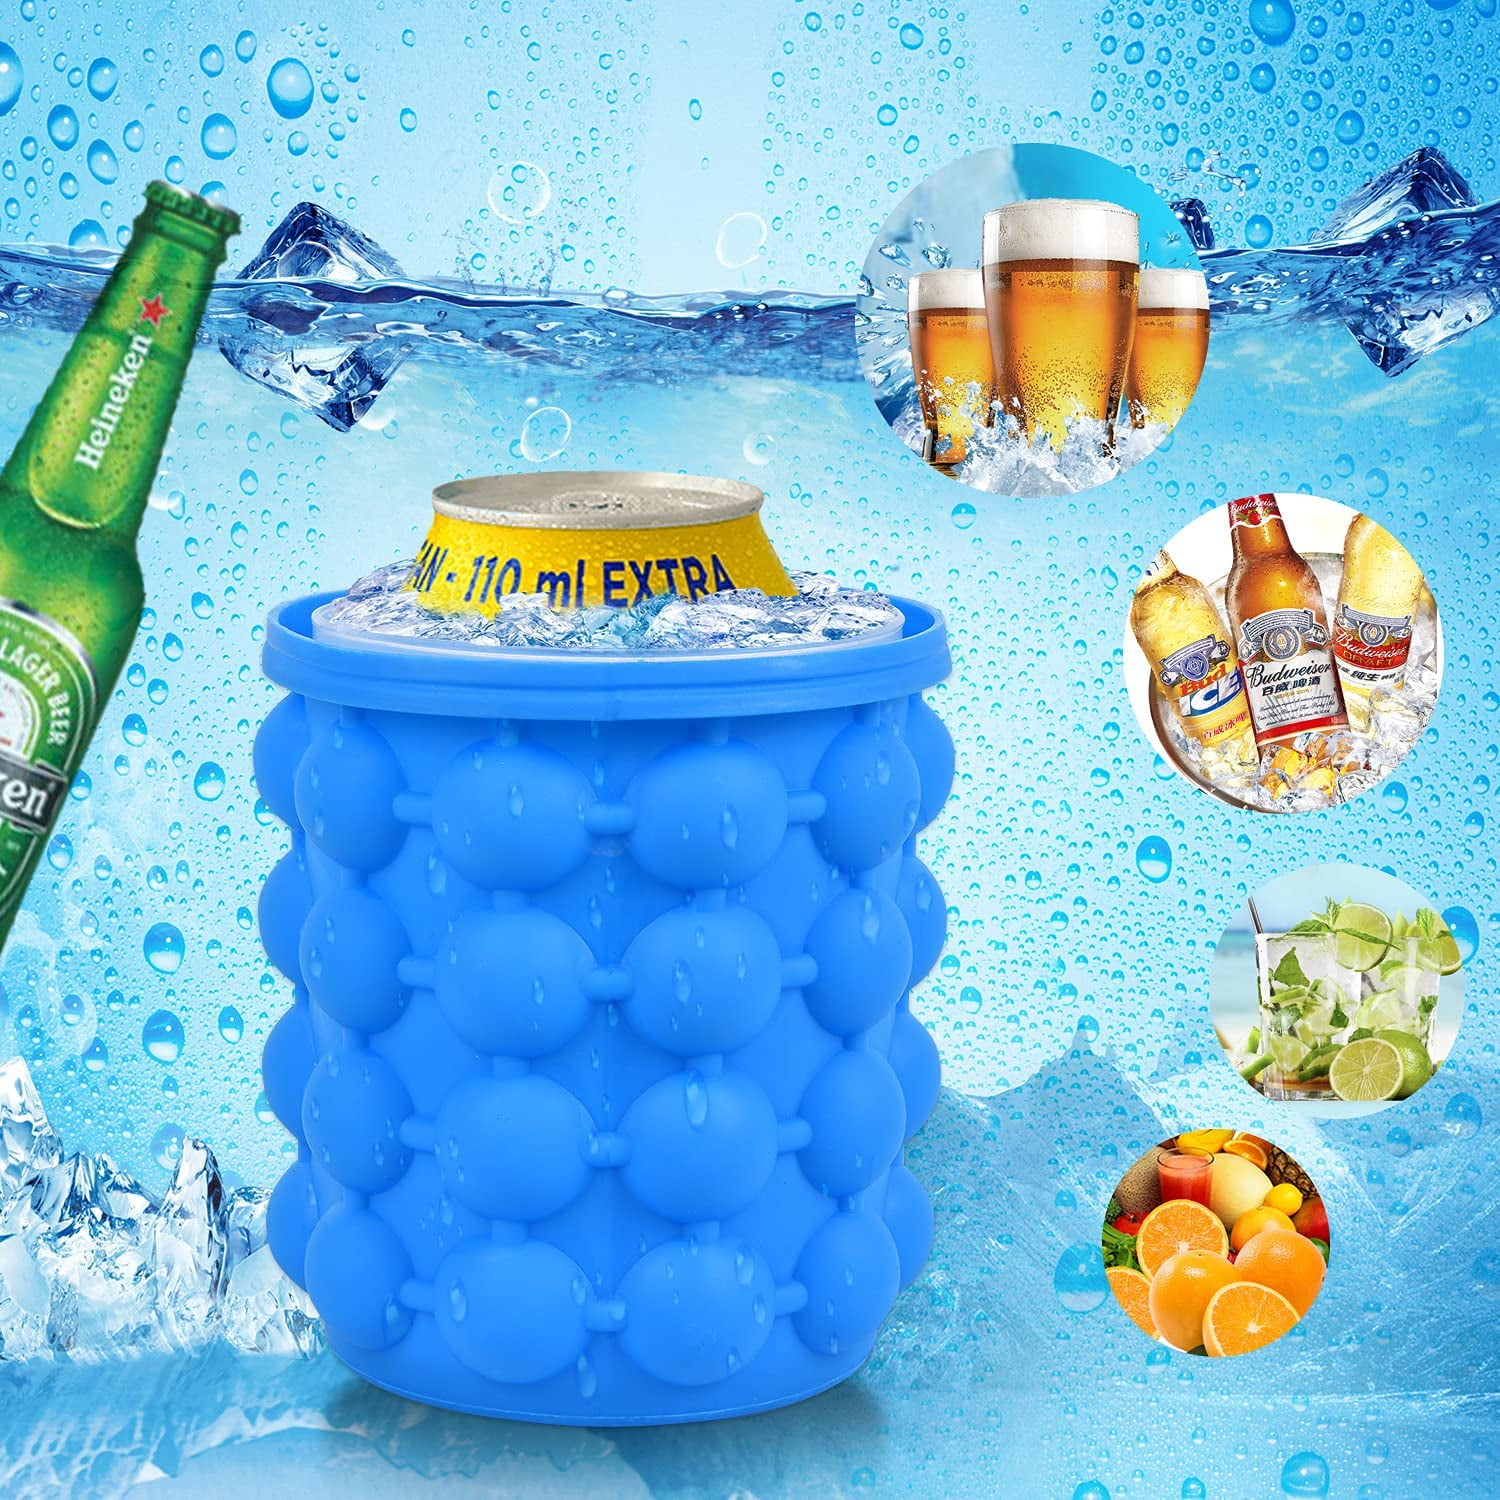 1pc Silicone Ice Bucket Cup Mold Ice Cubes Tray Food Grade Quickly Freeze  Creative Design Frozen Drink Maker For Whiskey Beer - Buckets, Coolers & Ice  Bags - AliExpress